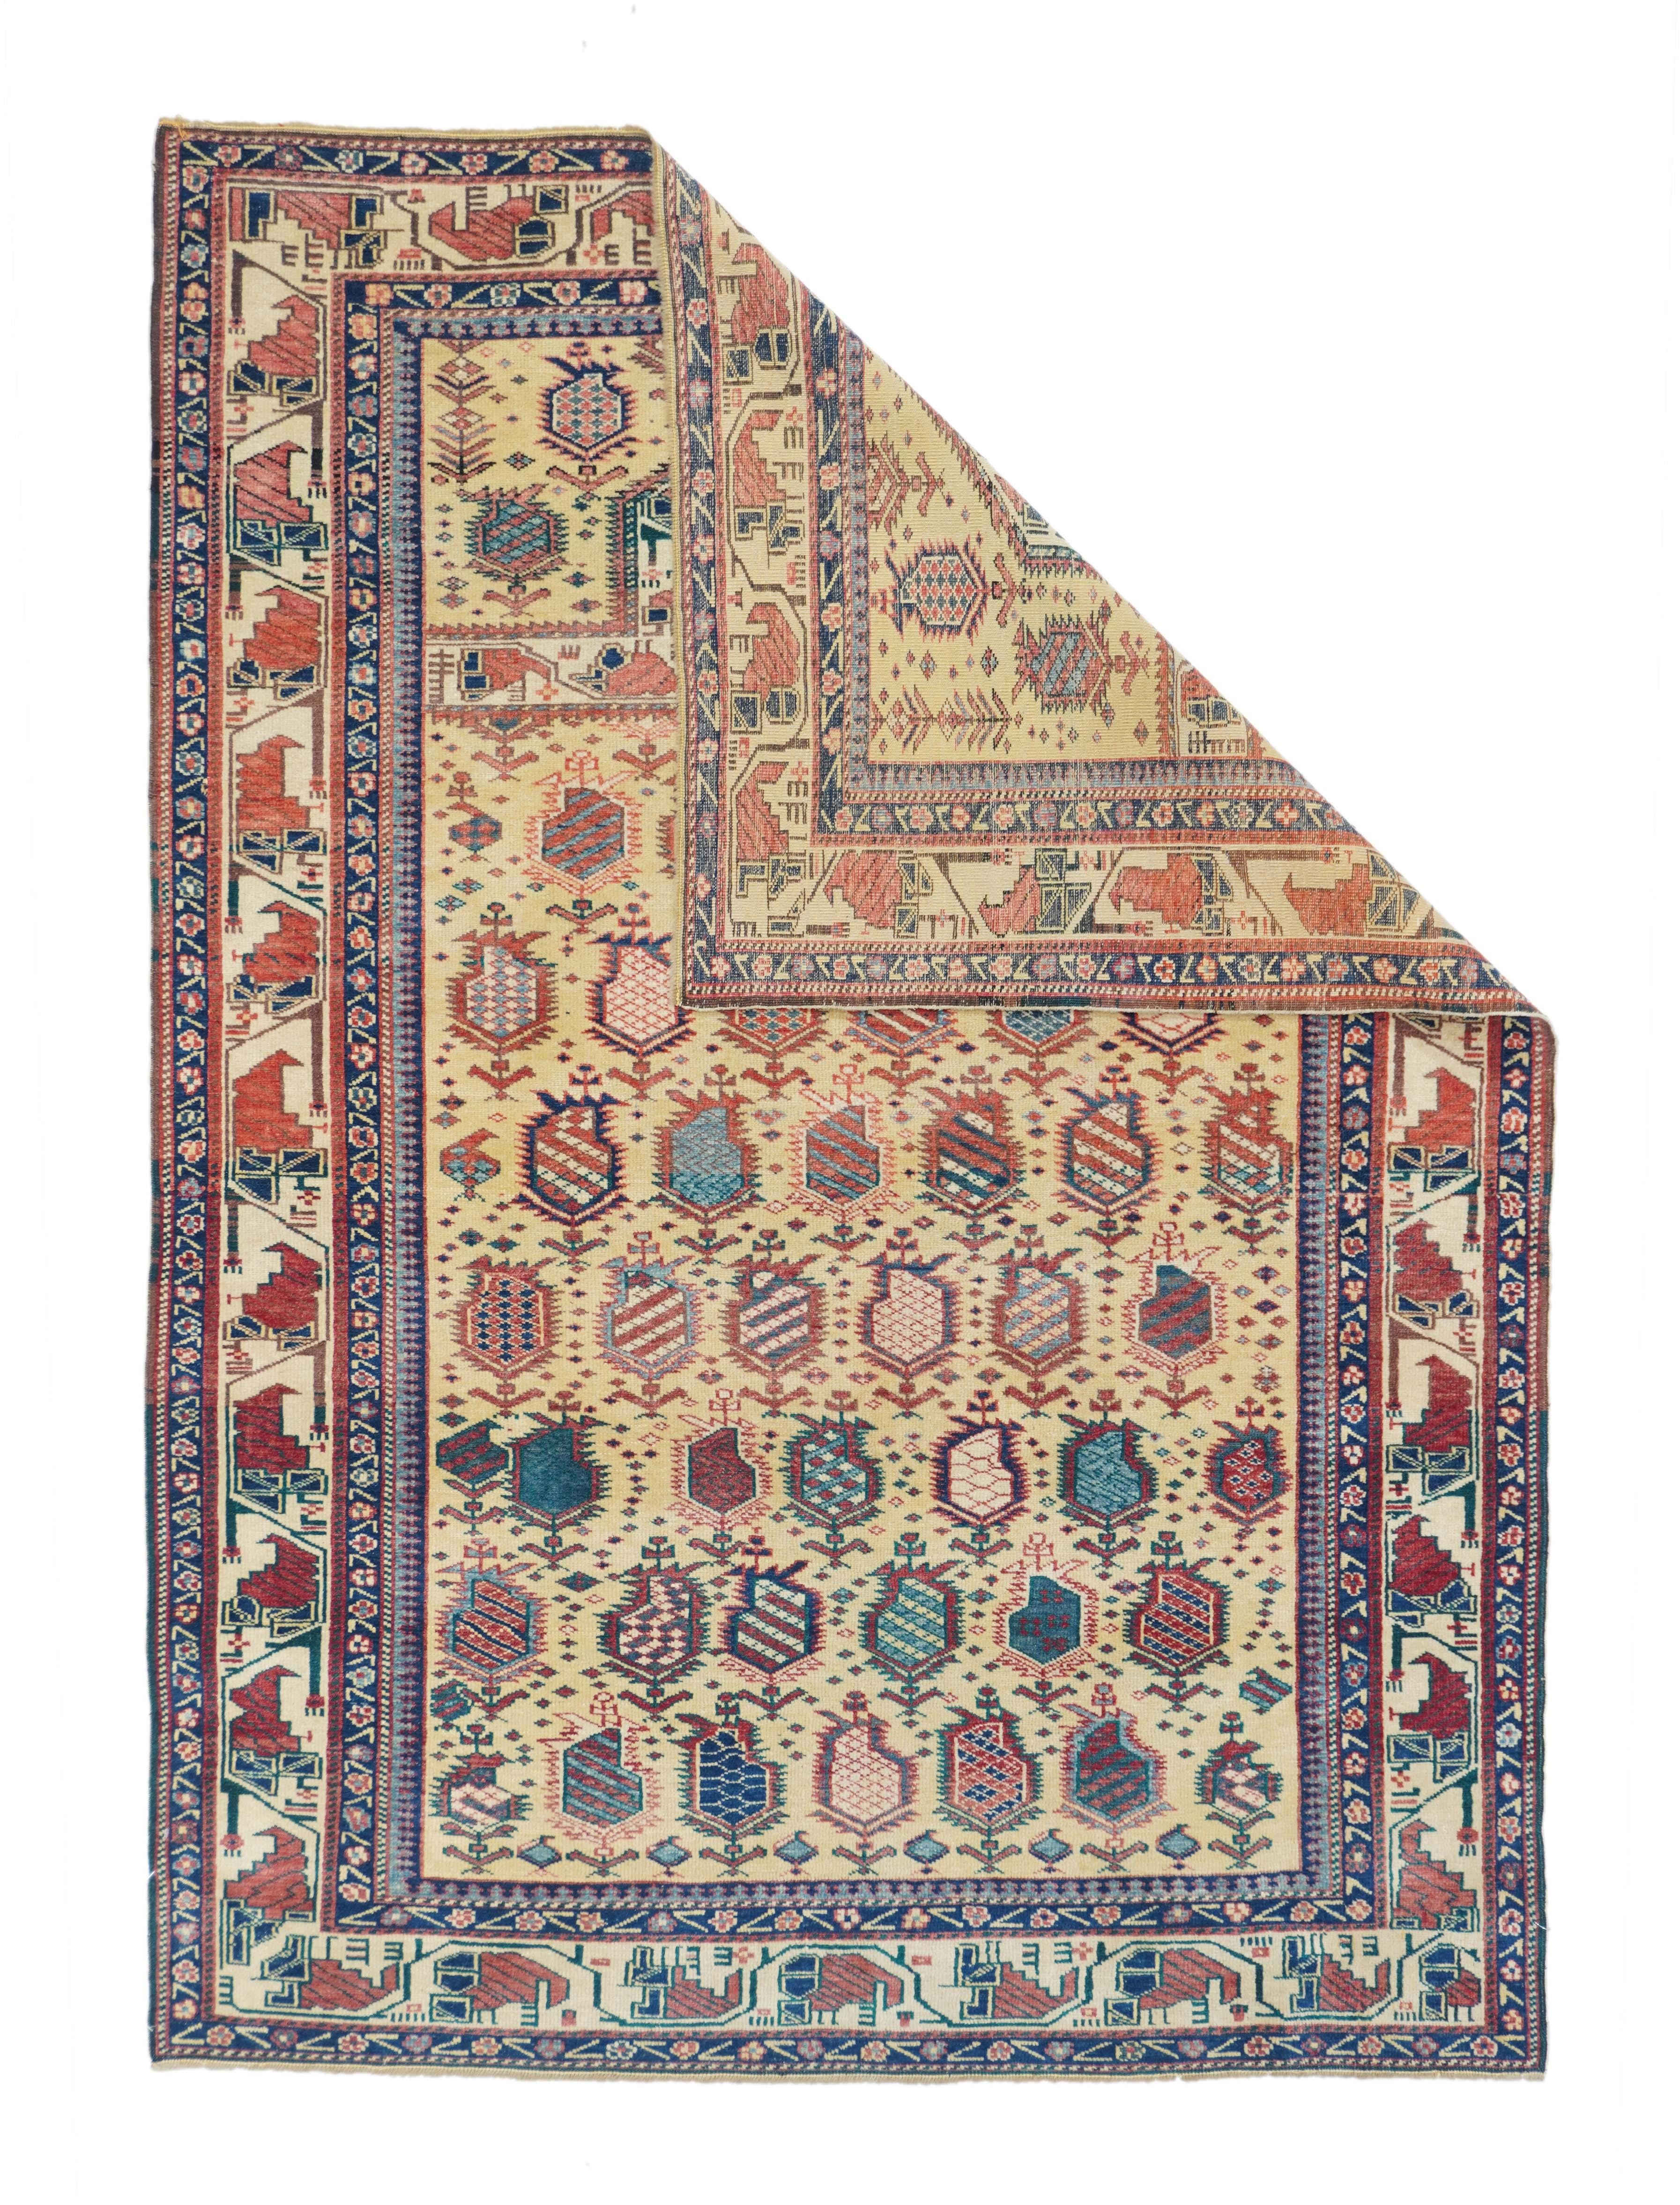 Antique Shirvan Caucasian rug measures 4'4'' x 6'1''. This extremely desirable east Caucasian finely woven piece, better for the wall, has a light straw-yellow ground with rows of reversing botehs continuing into the spandrels, under and alongside